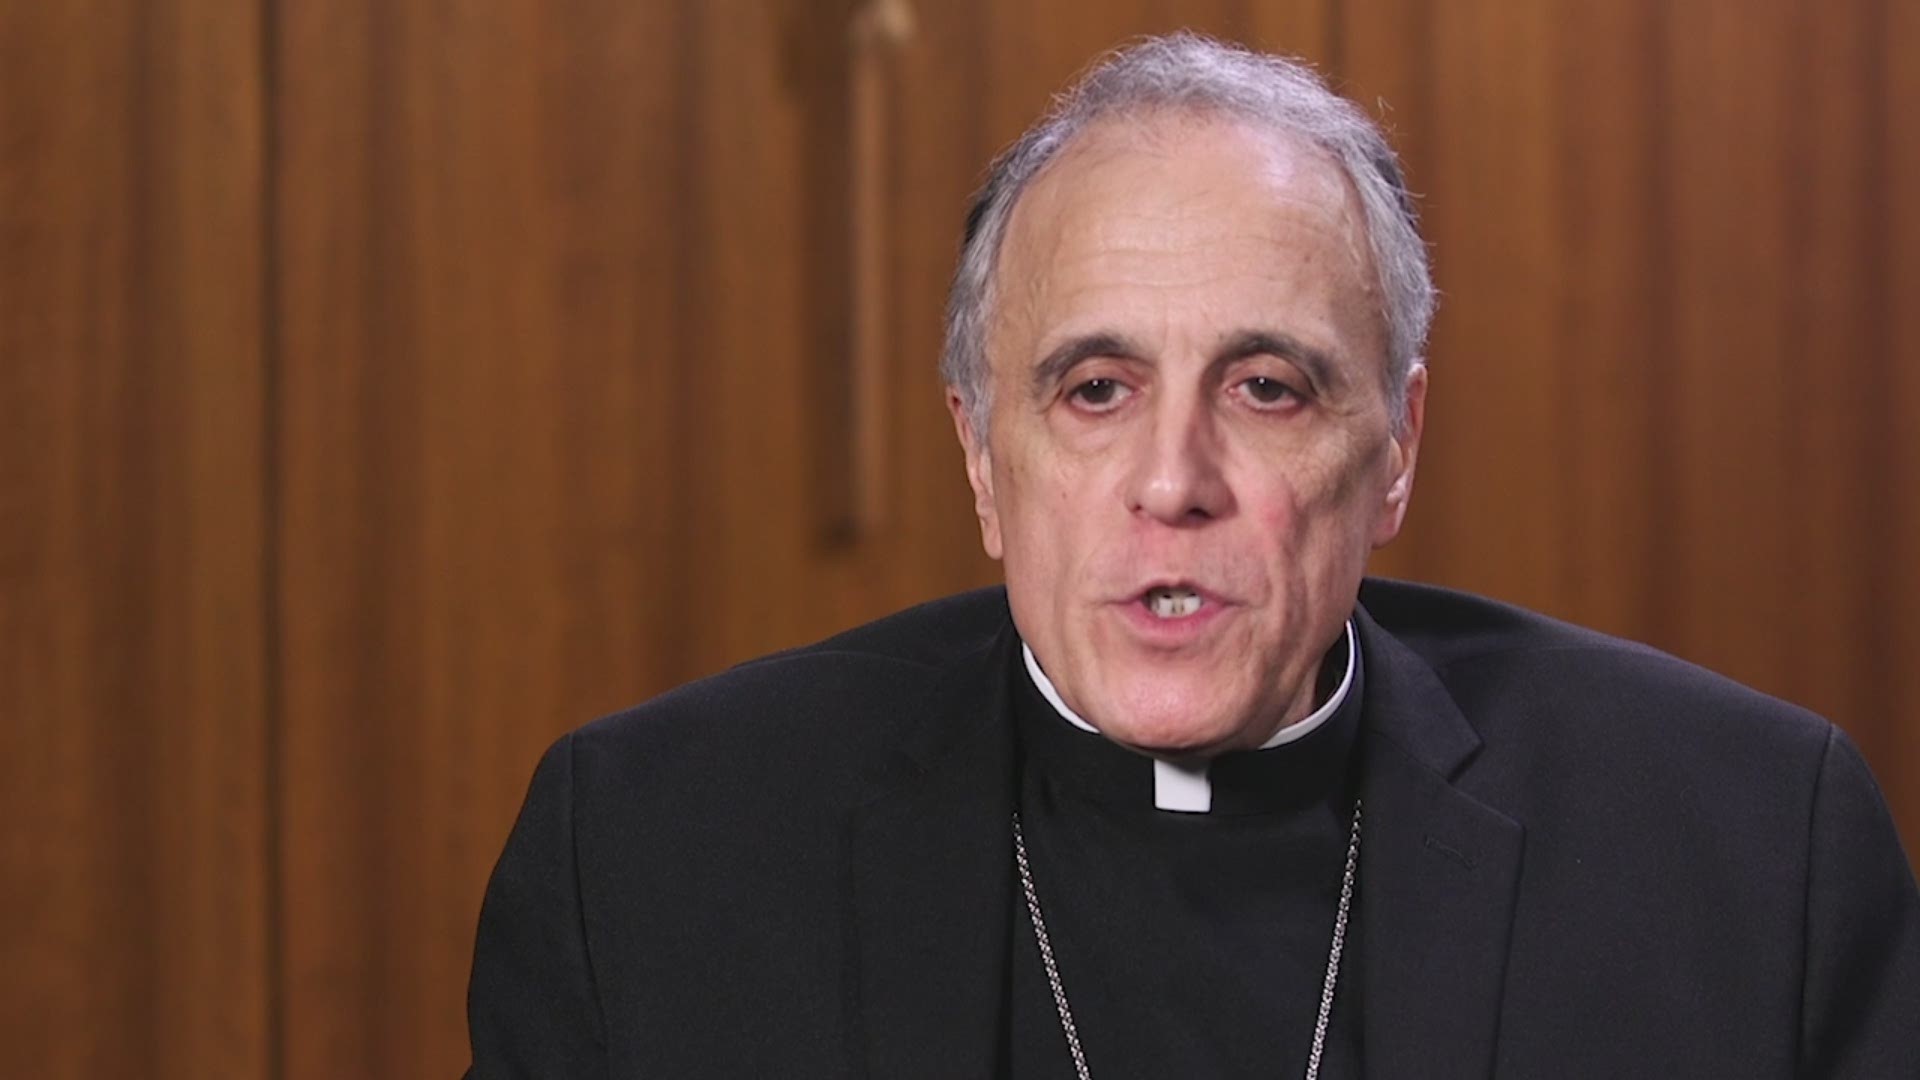 Cardinal DiNardo responded to the list of credibly-accused priests in the Catholic Church sex abuse scandal.